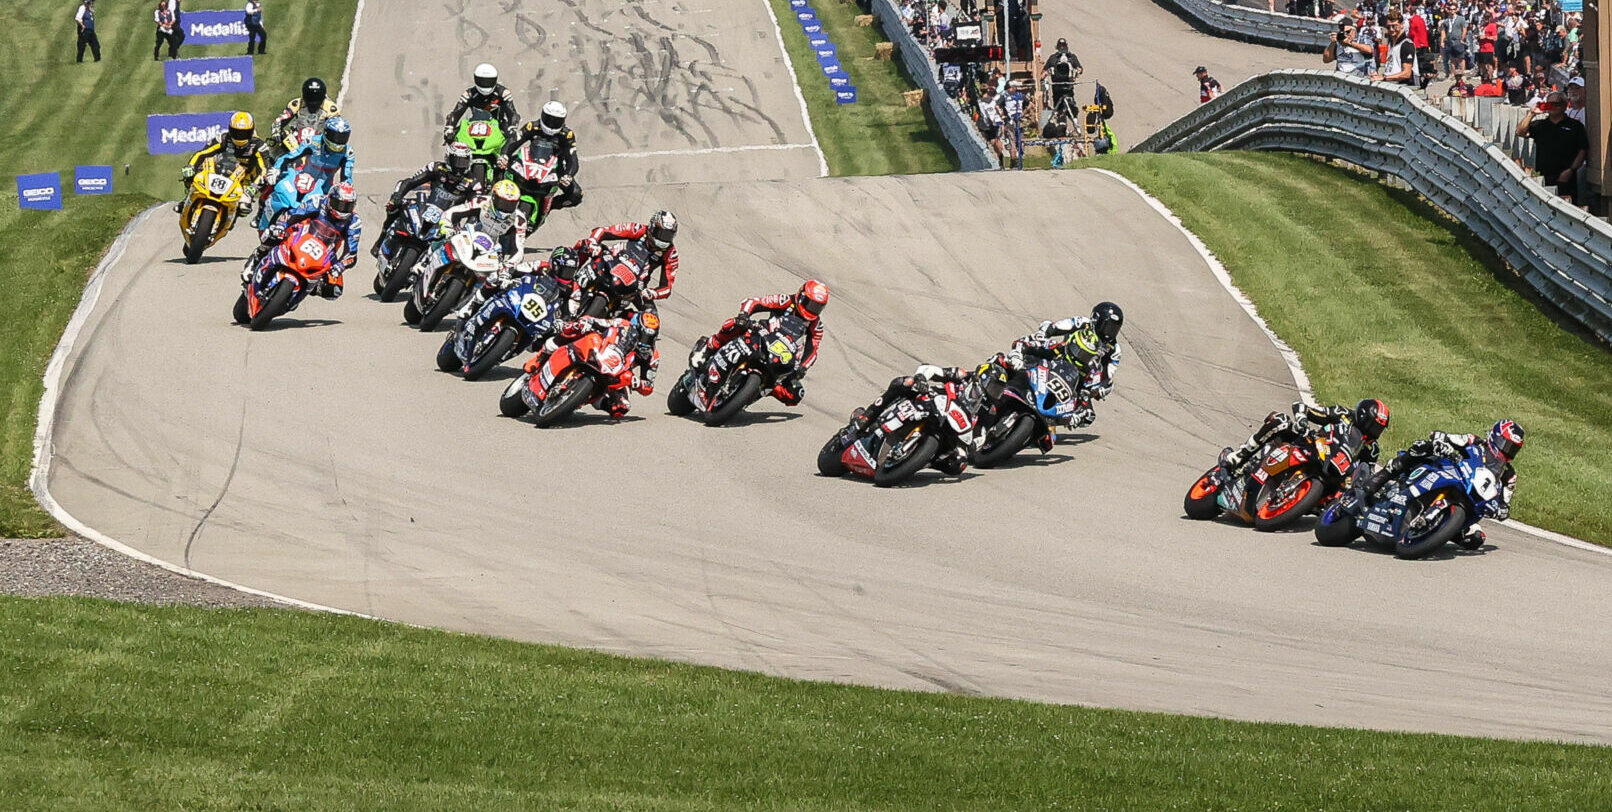 Jake Gagne (1) leads Mathew Scholtz (11), Bobby Fong (50), PJ Jacobsen (99), Cameron Beaubier (behind Jacobsen), Richie Escalante (54), Josh Herrin (2), and the rest into Turn One at Pittsburgh International Race Complex. Photo by Brian J. Nelson.